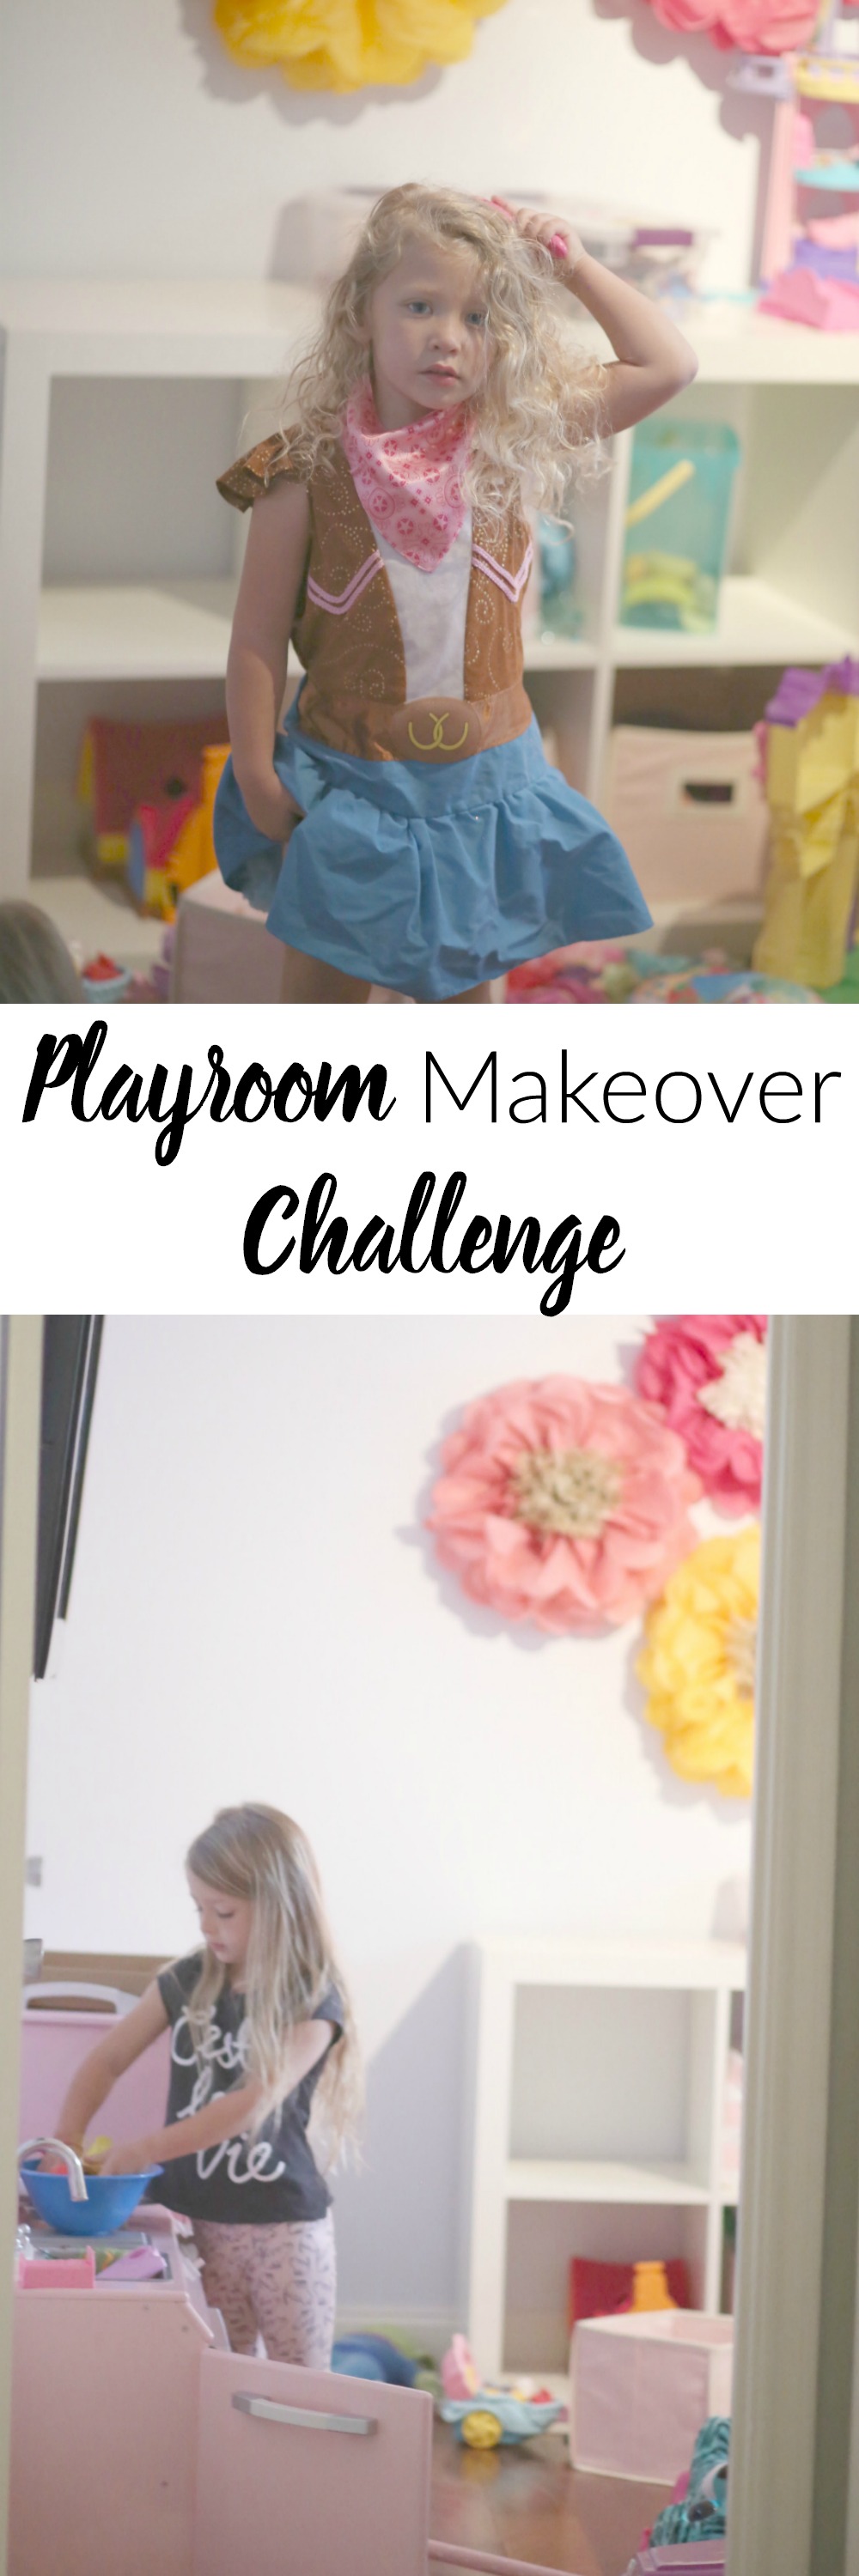 Playroom Makeover Challenge. Such great ideas on turning a playroom for toddlers into one for growing kids.